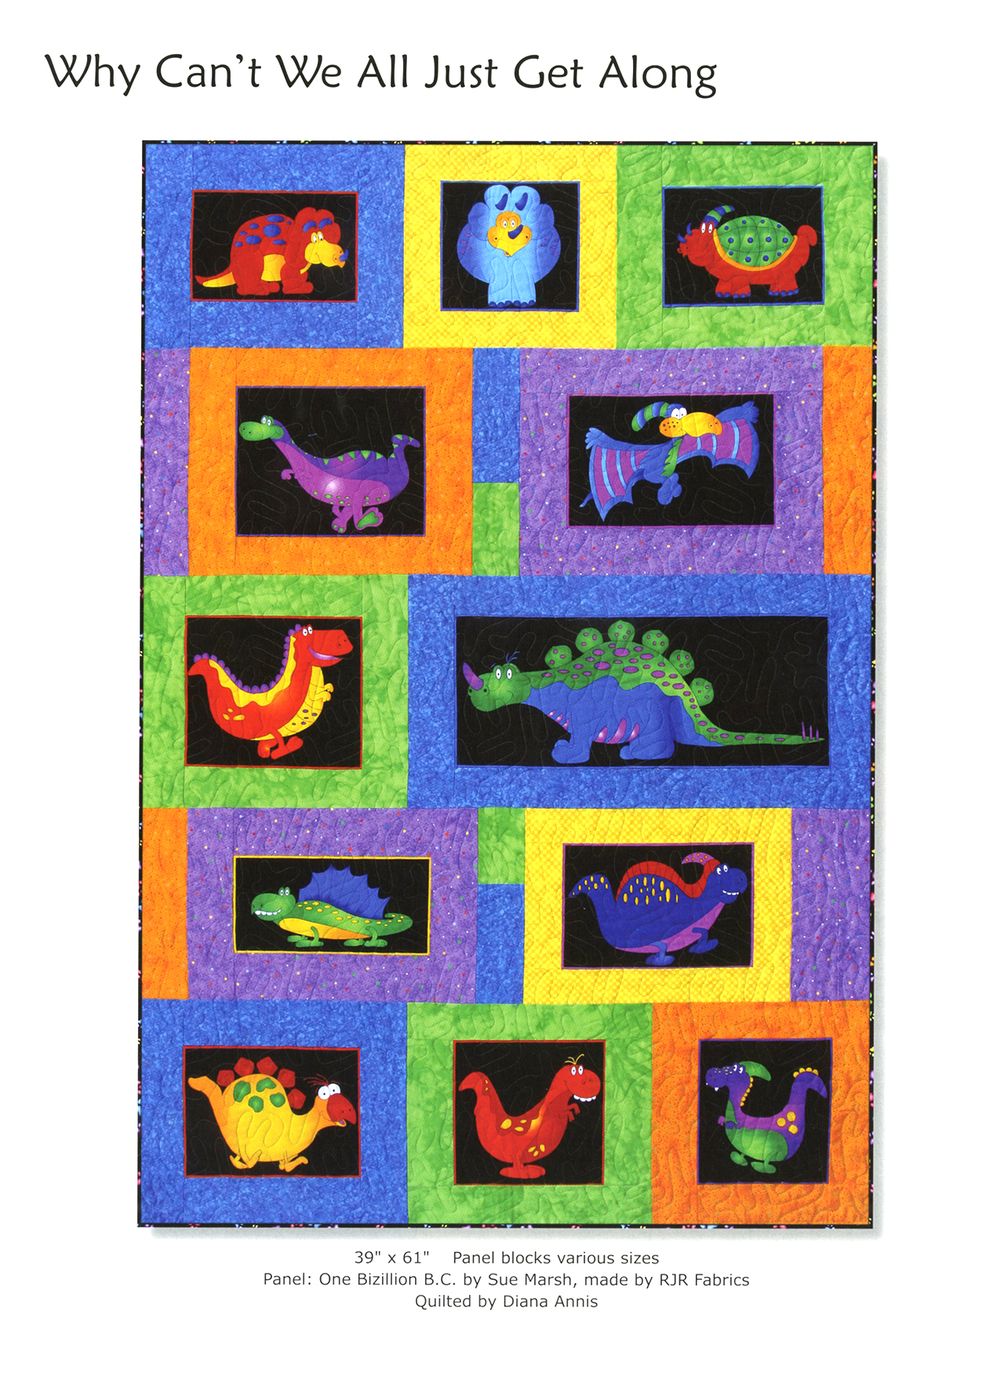 Panel Play Quilt Pattern